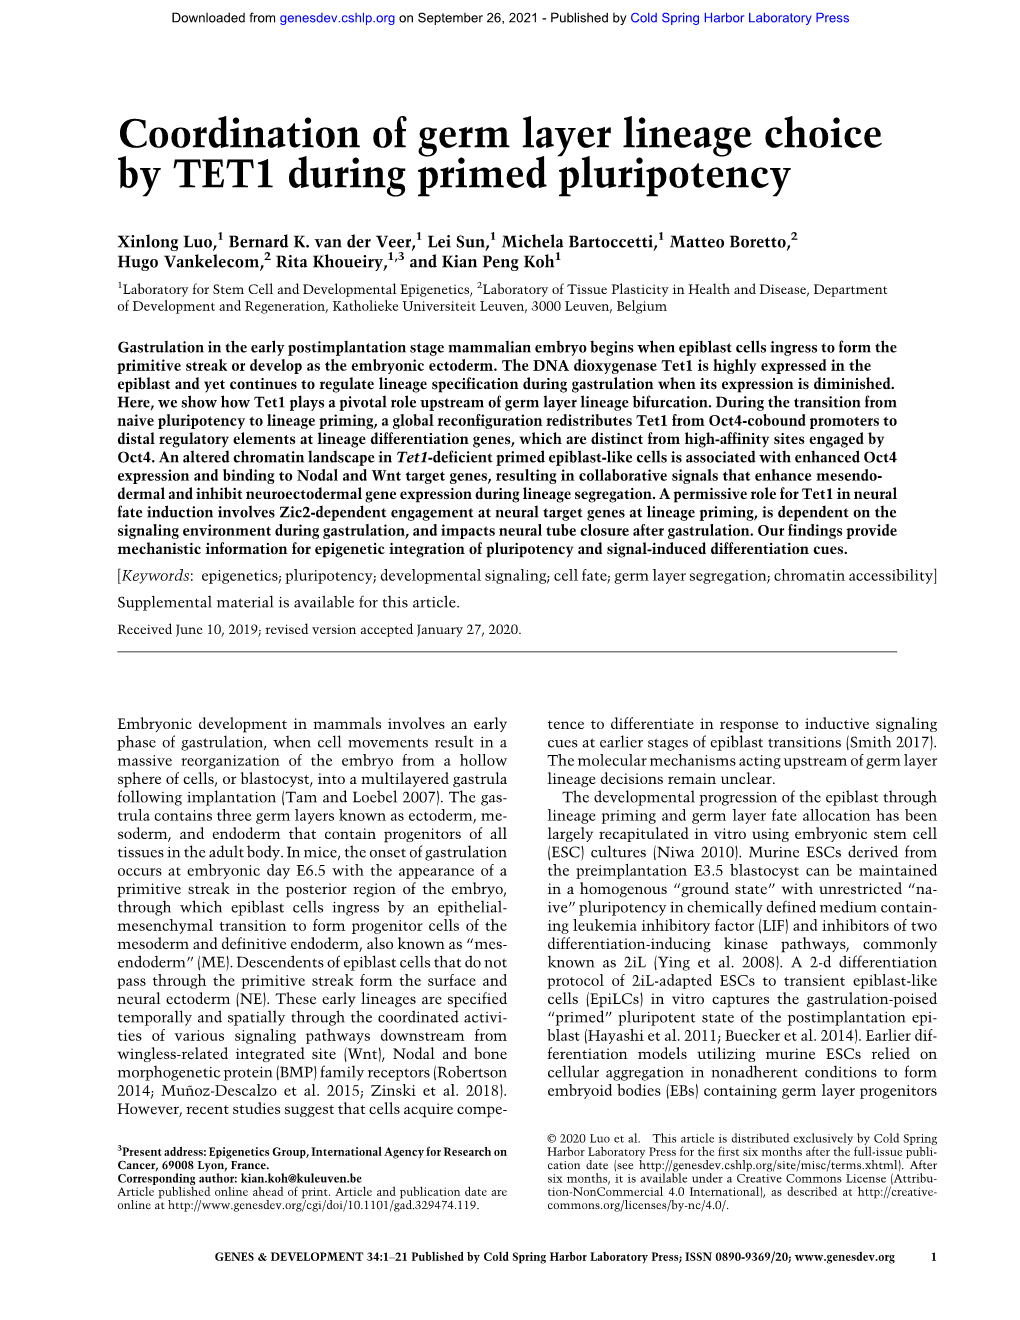 Coordination of Germ Layer Lineage Choice by TET1 During Primed Pluripotency